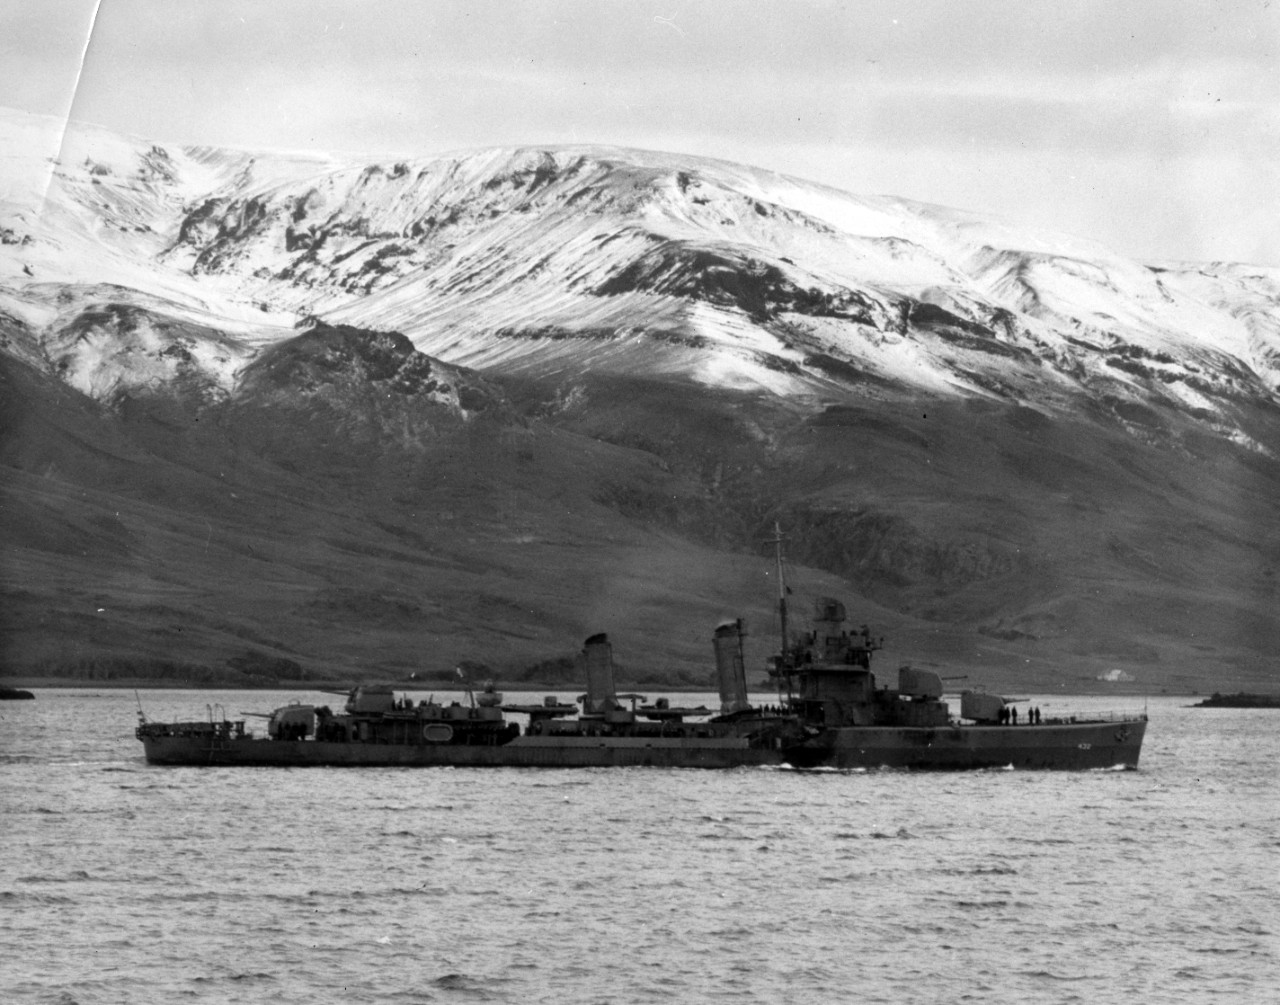 The USS Kearney (DD-432) stands in, Hvalfjordur, Iceland, October 19, 1941. The torpedos hit under her No.1 stack in the forward fire room - note the hole. From the VADM Robert C. Giffen Photo Collection. 